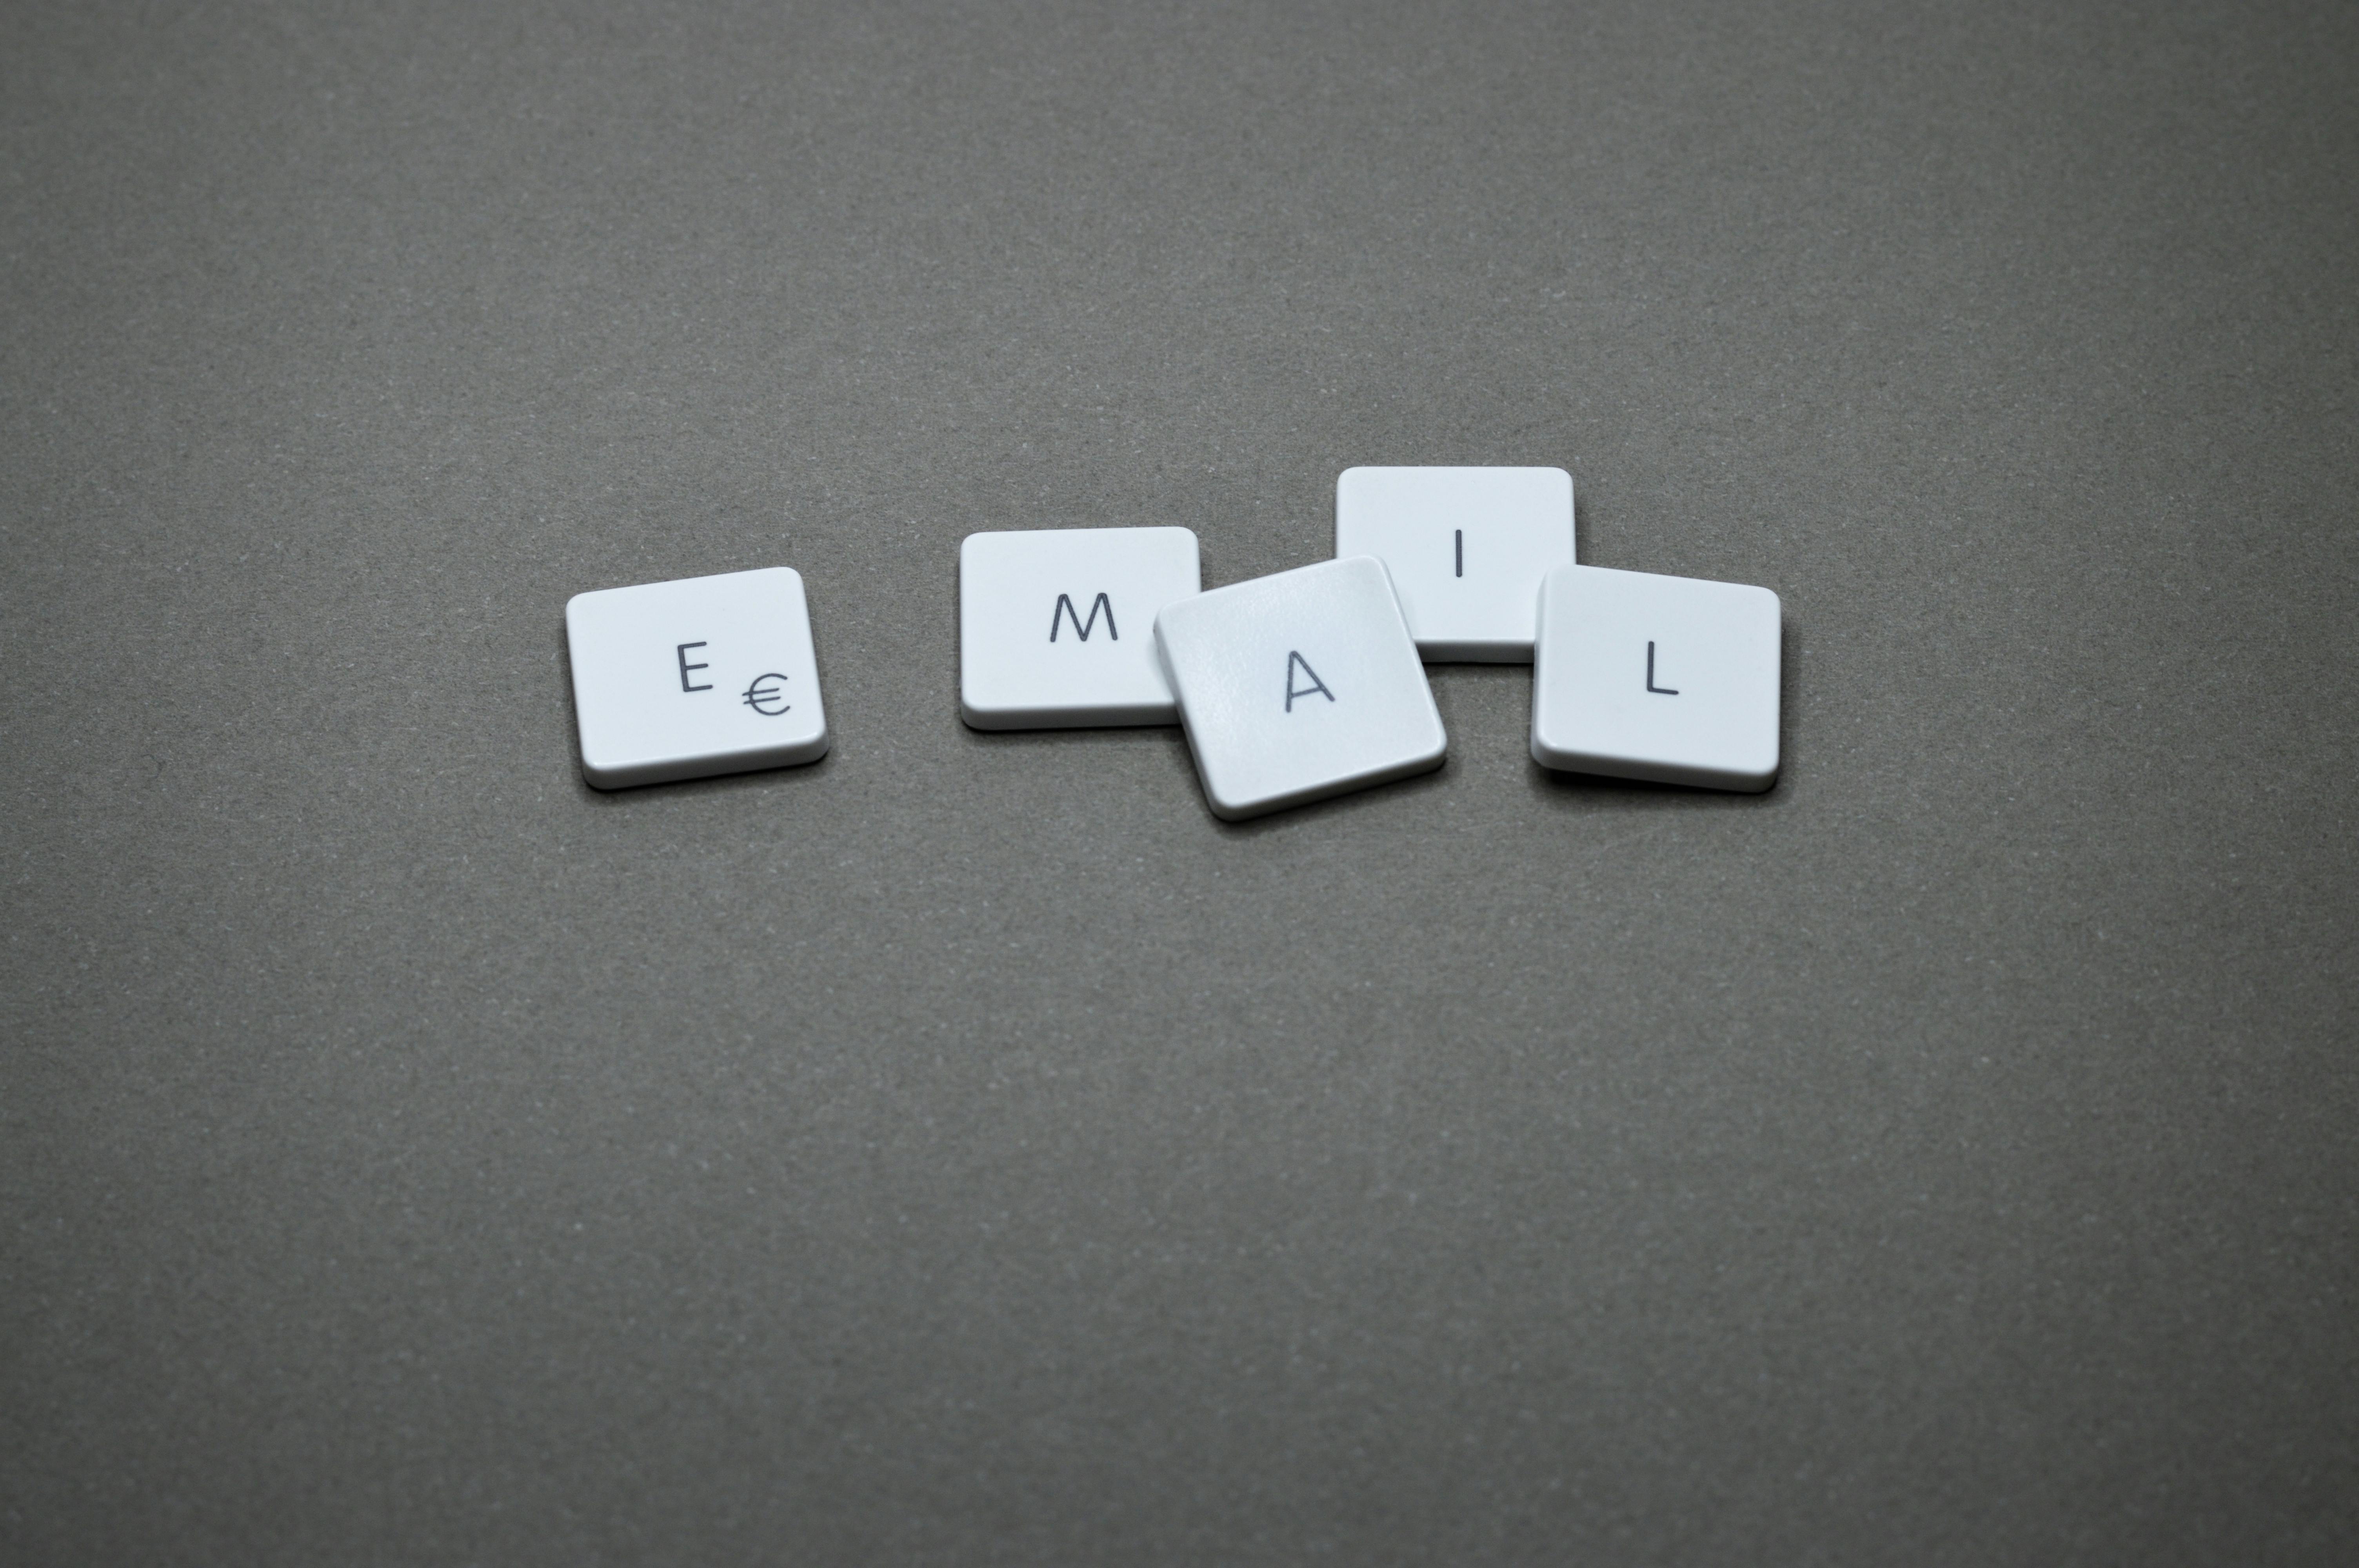 the word "email" displayed using keyboard keys that look like scrabble tiles